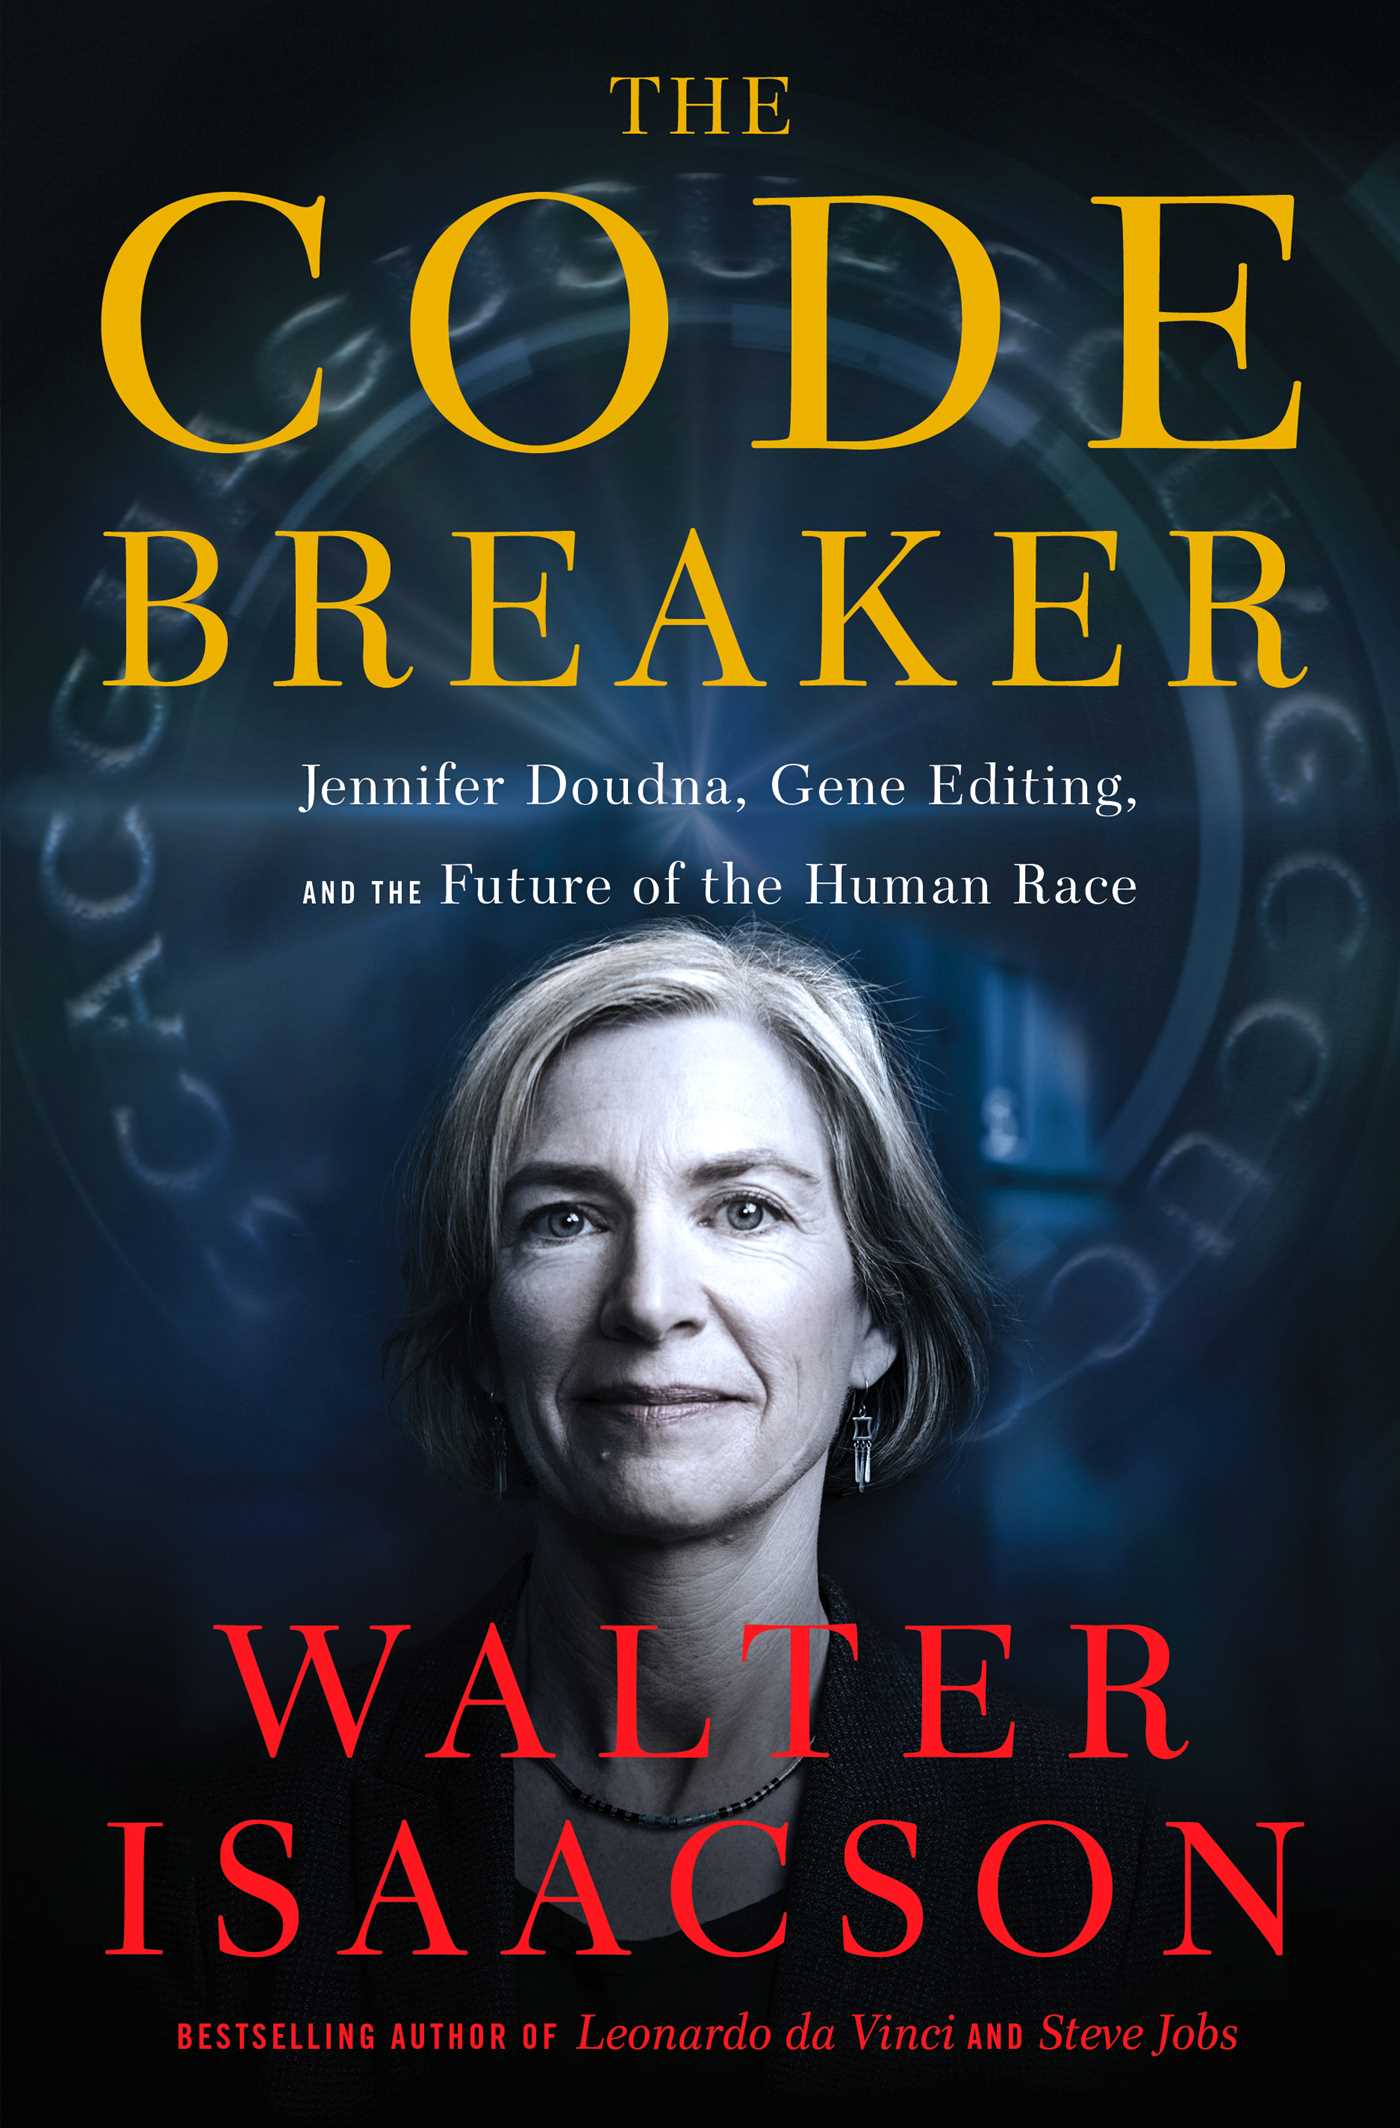 [EPUB] The Code Breaker: Jennifer Doudna, Gene Editing, and the Future of the Human Race by Walter Isaacson